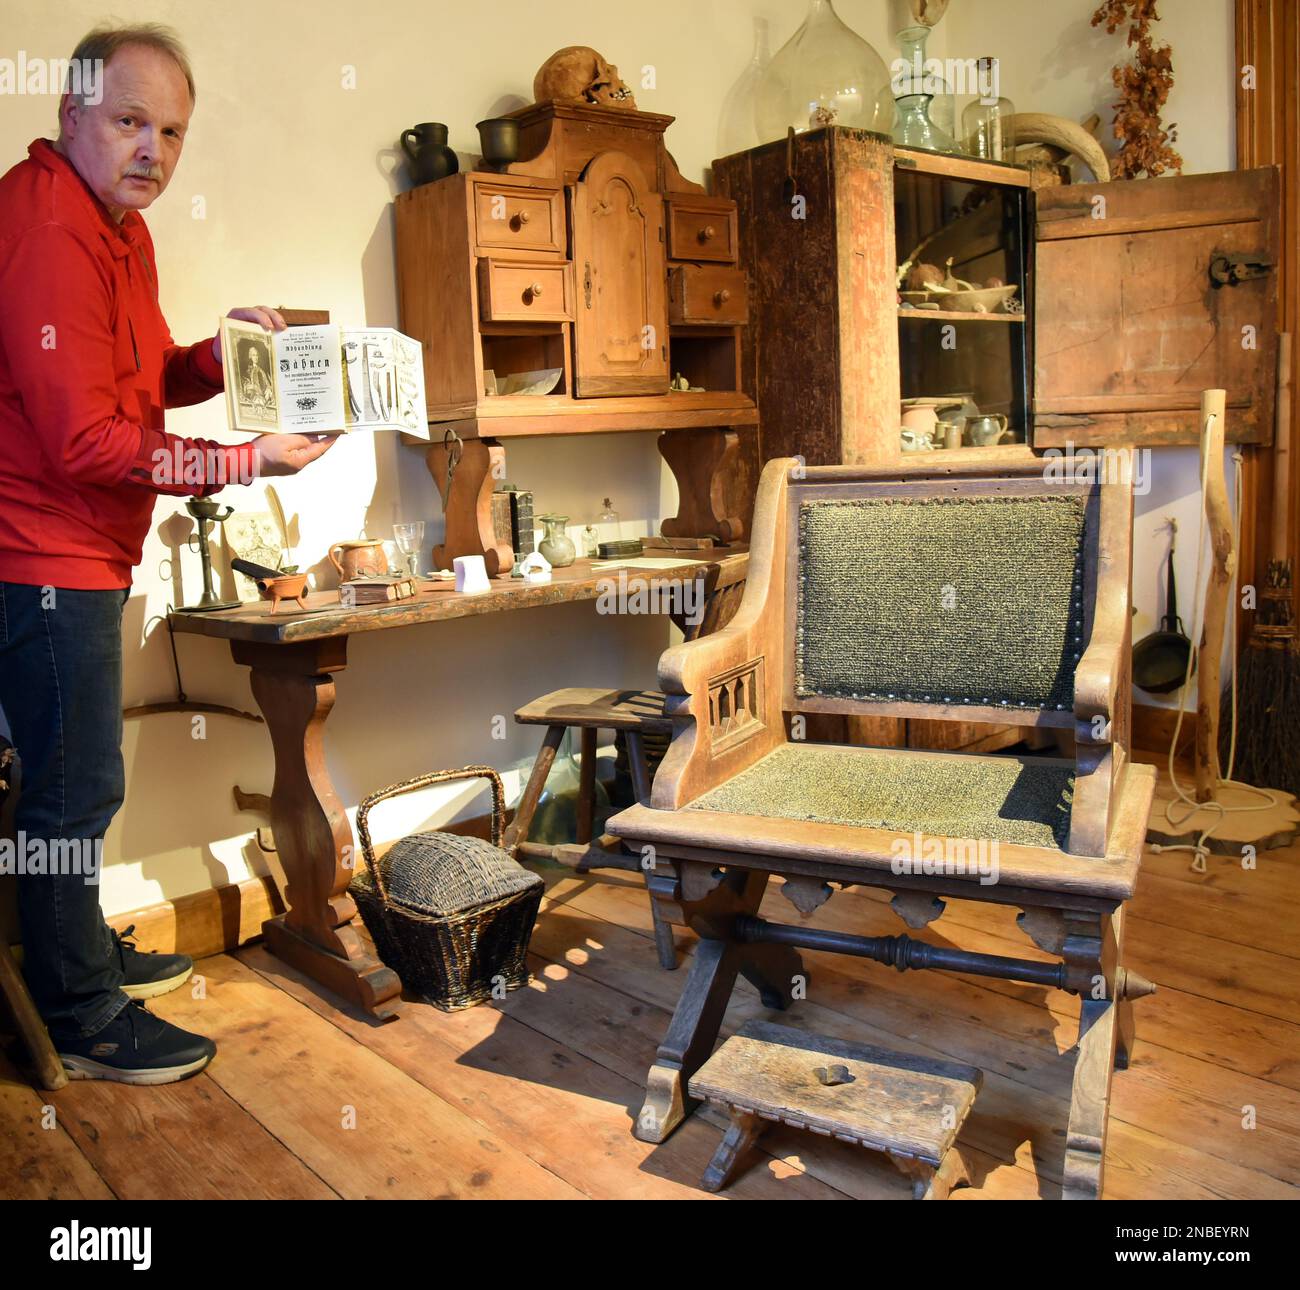 PRODUCTION - 10 January 2023, Saxony, Zschadraß B. Colditz: At the Dental Museum in Zschadraß near Colditz, which has the largest dental history collection in the world, director Andreas Haesler stands in the oldest dental practice from 1750 that he has reconstructed. The practice and study of Philipp Pfaff, the royal Prussian court dentist of Frederick the Great, are among the more than half a million objects from the history of dentistry going back up to 2,500 years that the 61-year-old dental technician has collected over the past 20 years. The objects, some of which are unique and valuable Stock Photo